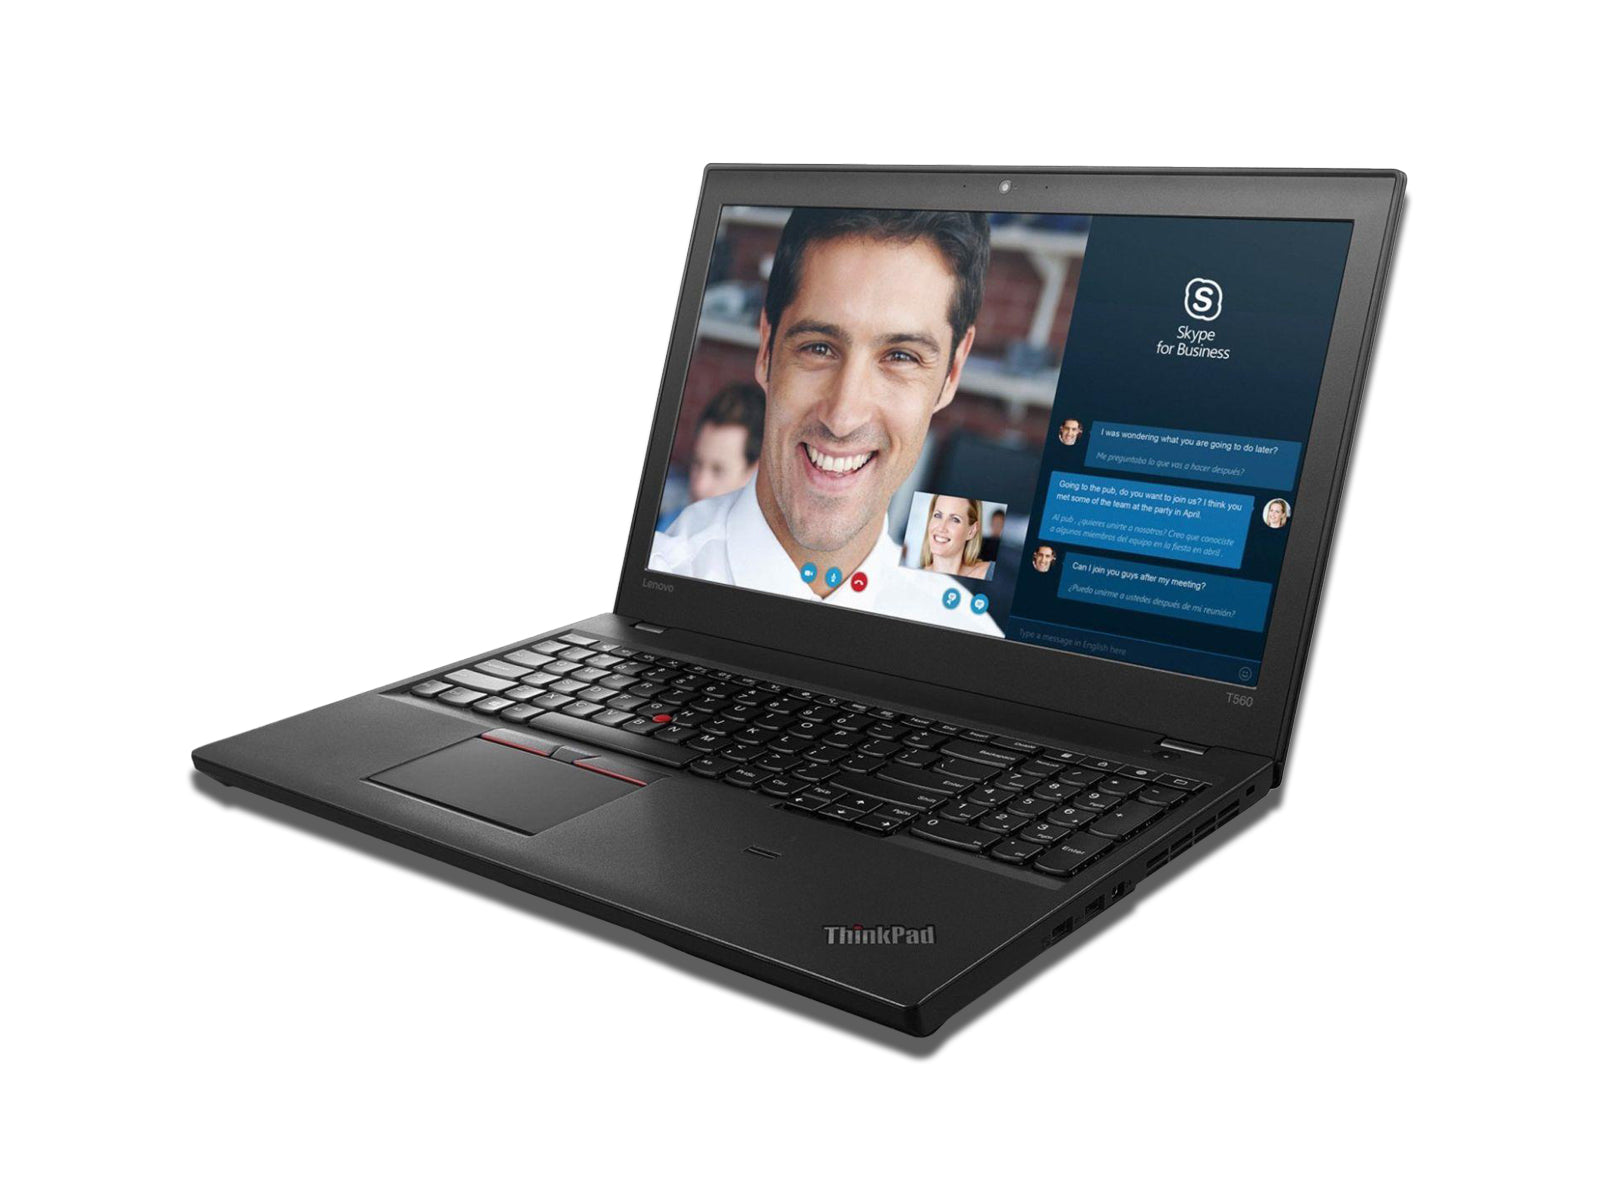 Image Showing Right Side View of The Lenovo T560 Laptop on The White Background